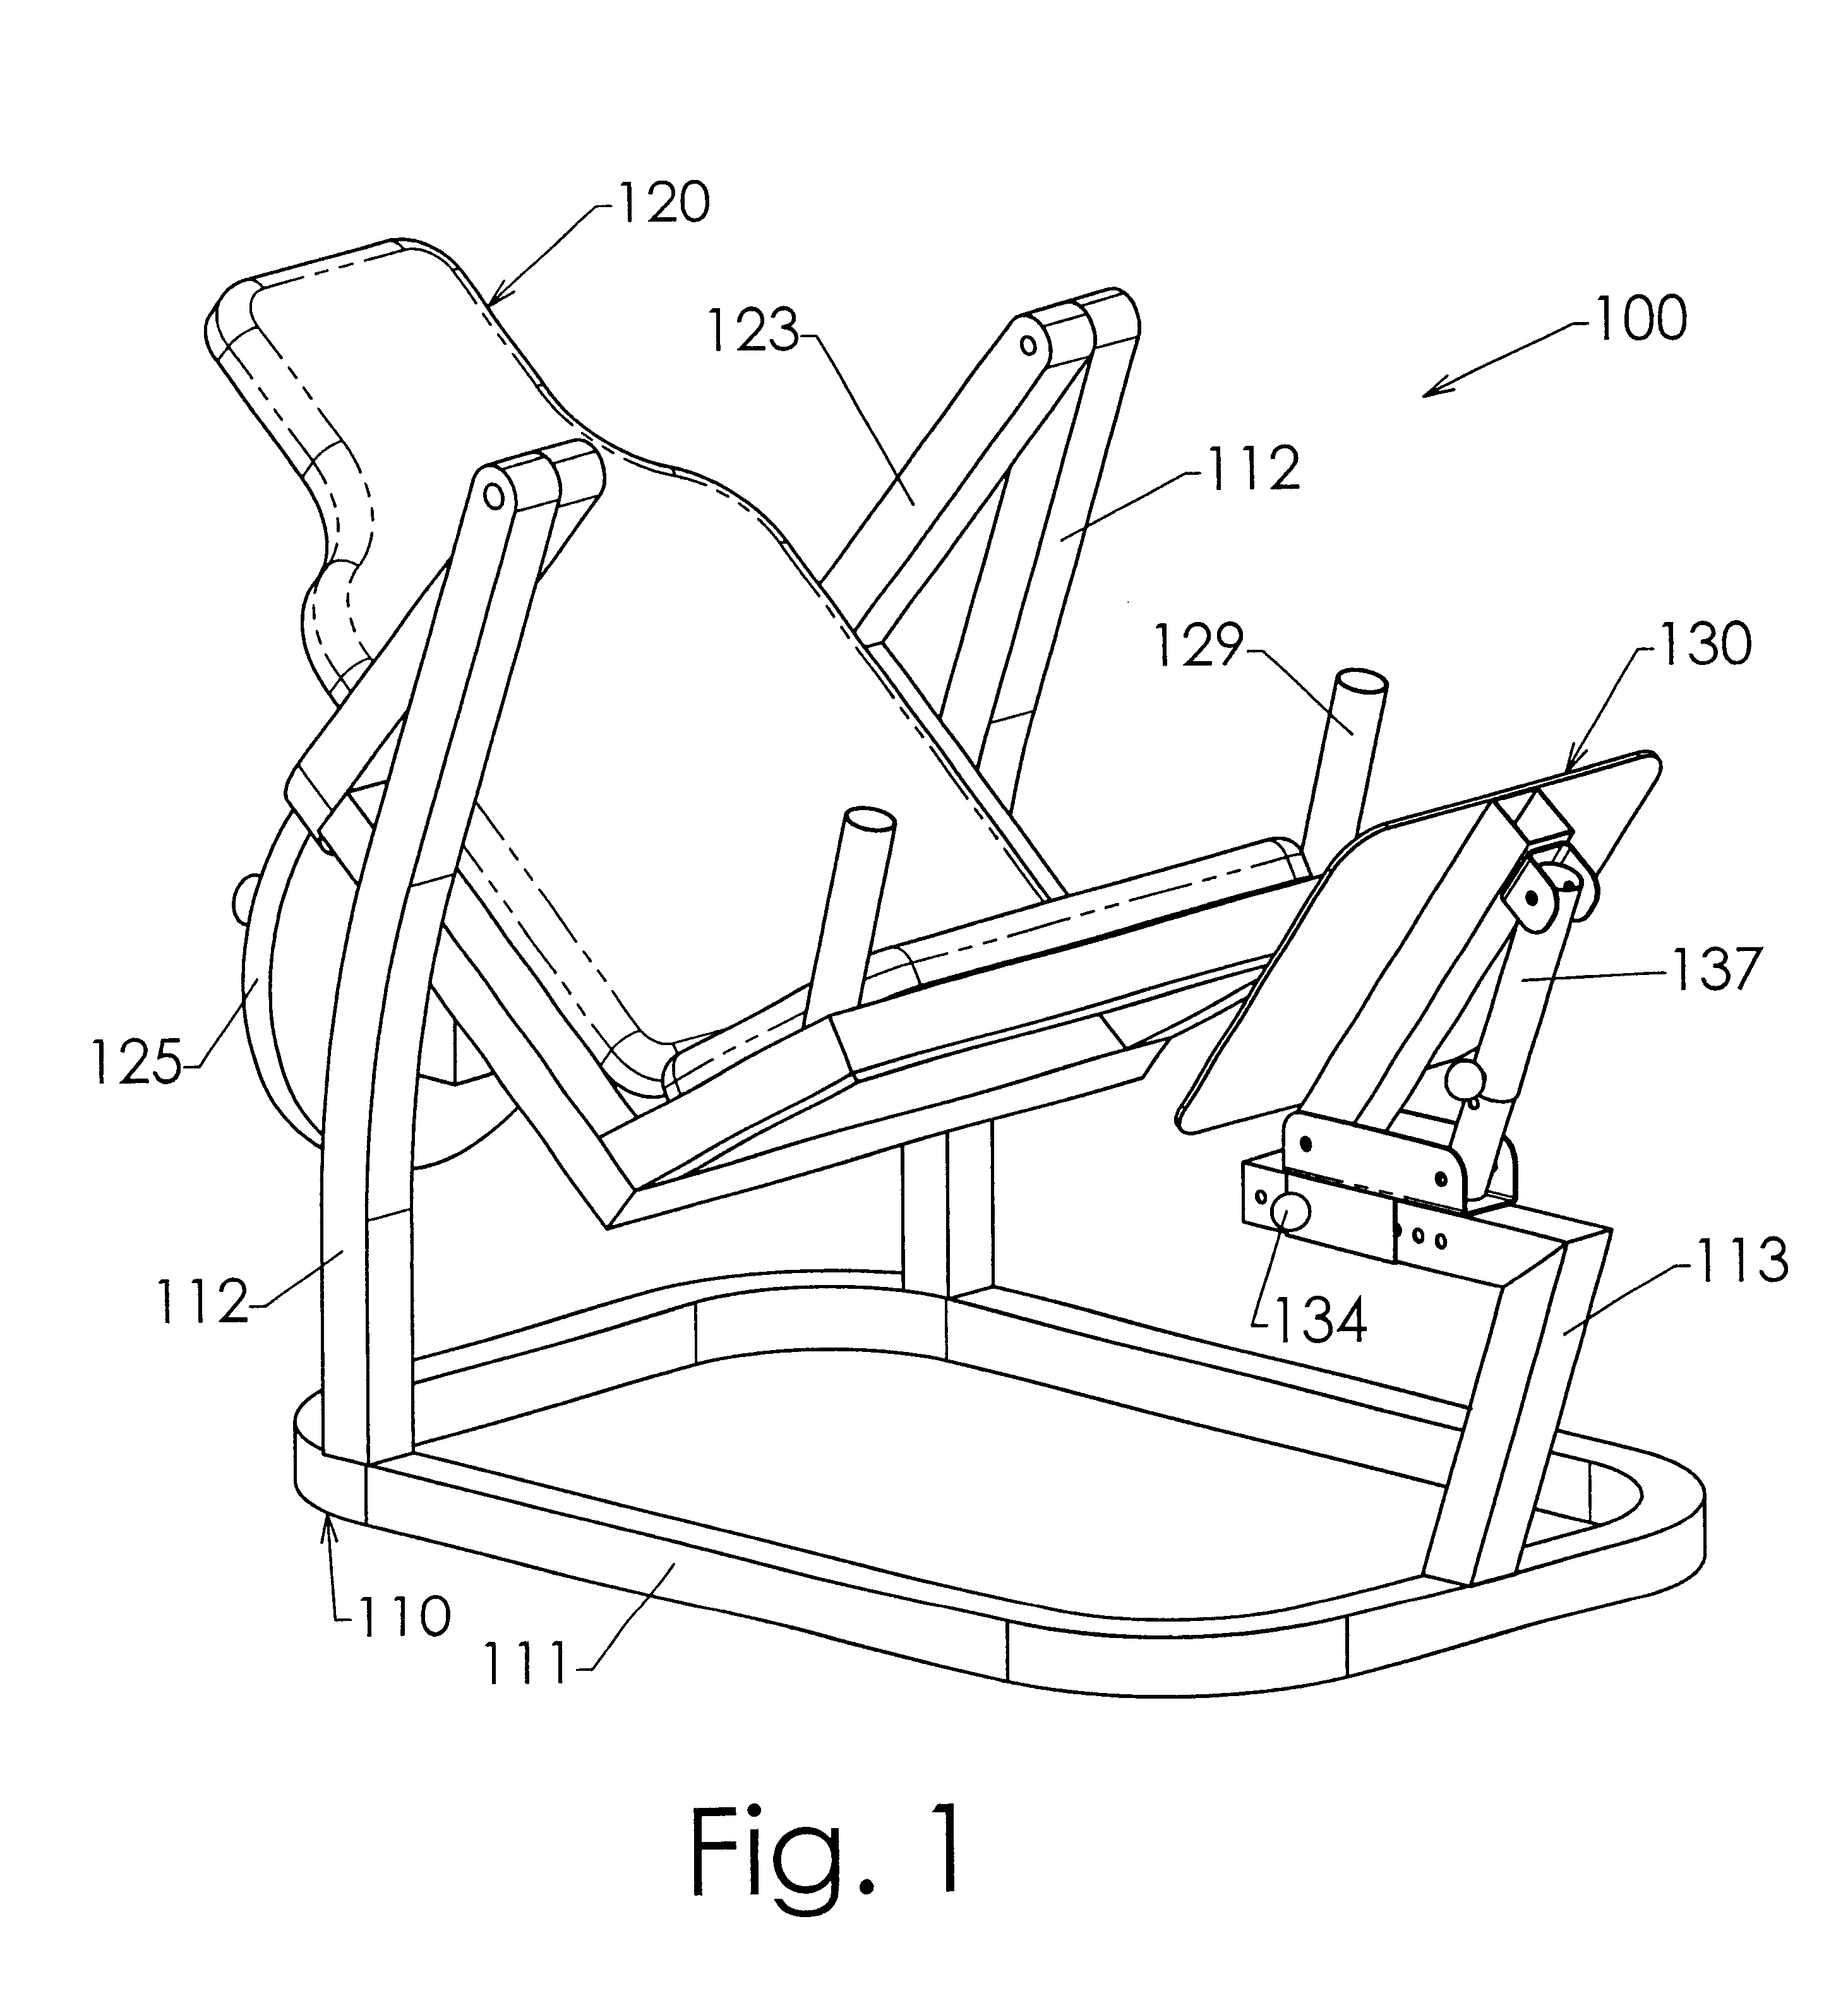 Methods and apparatus for exercising a person's quadriceps muscles